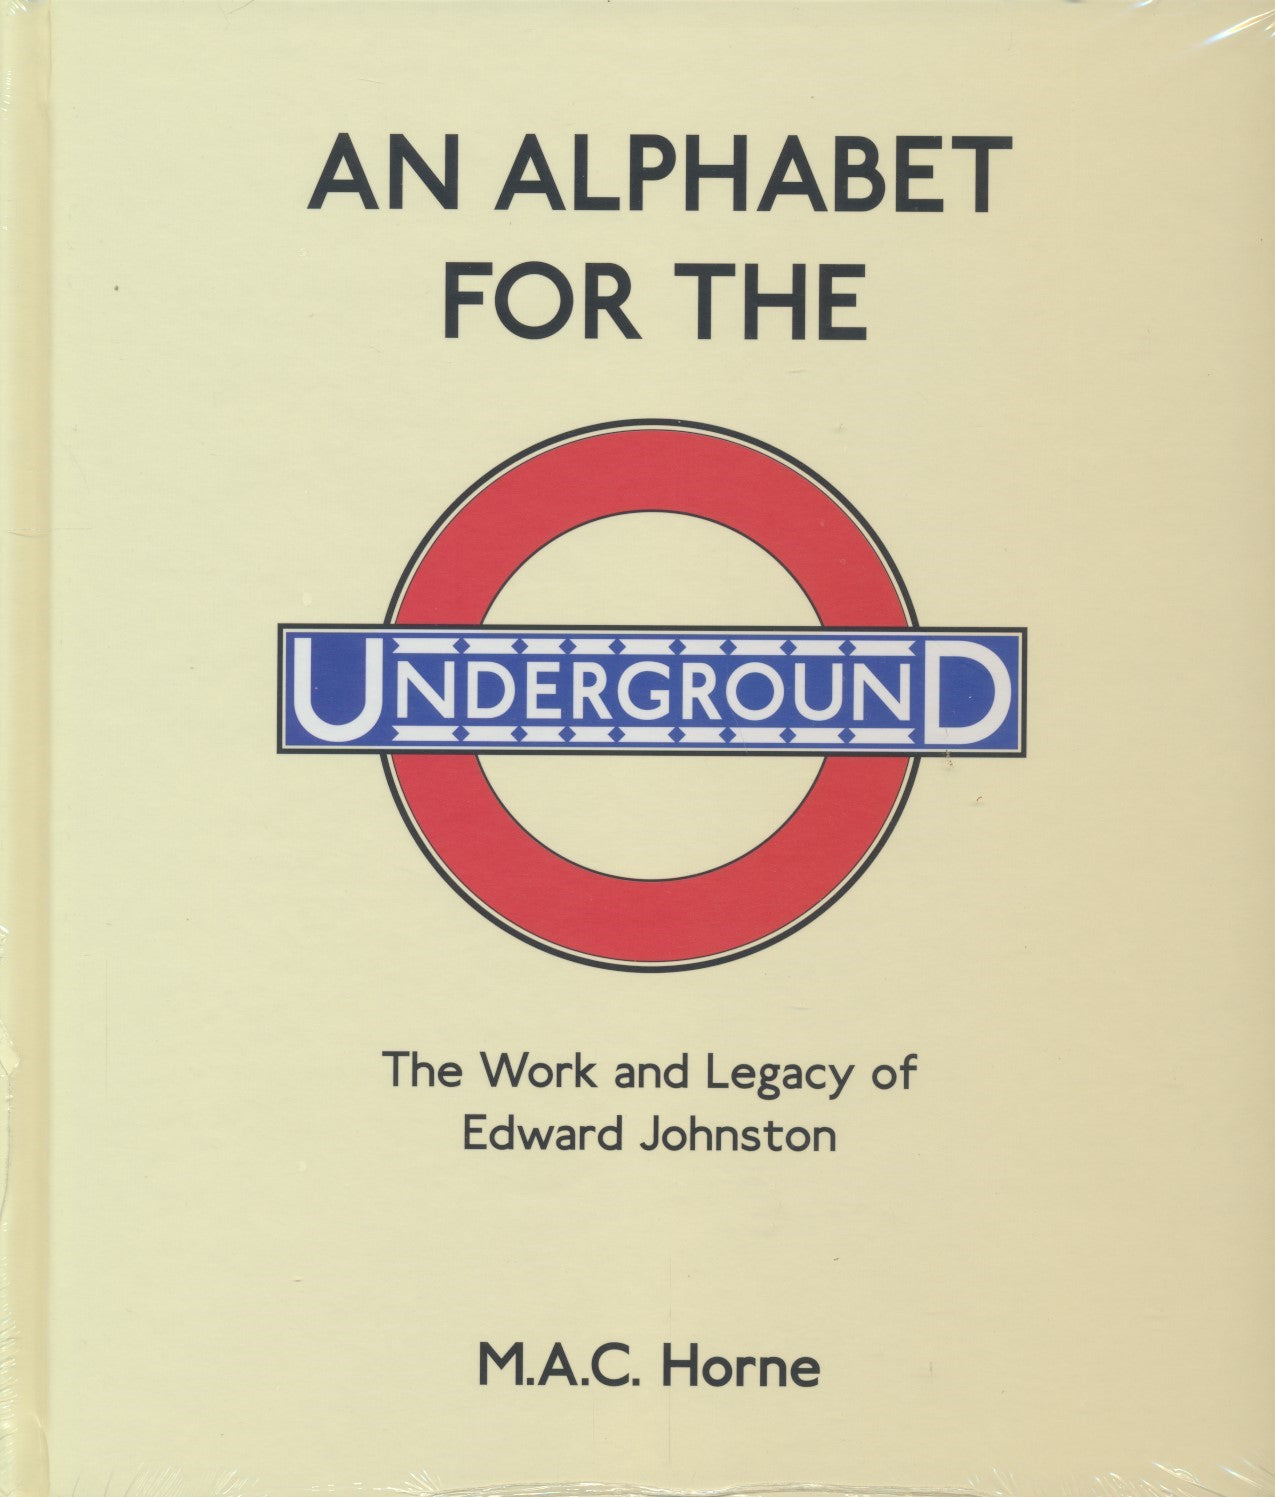 An Alphabet for the Underground: The Work and Legacy of Edward Johnston